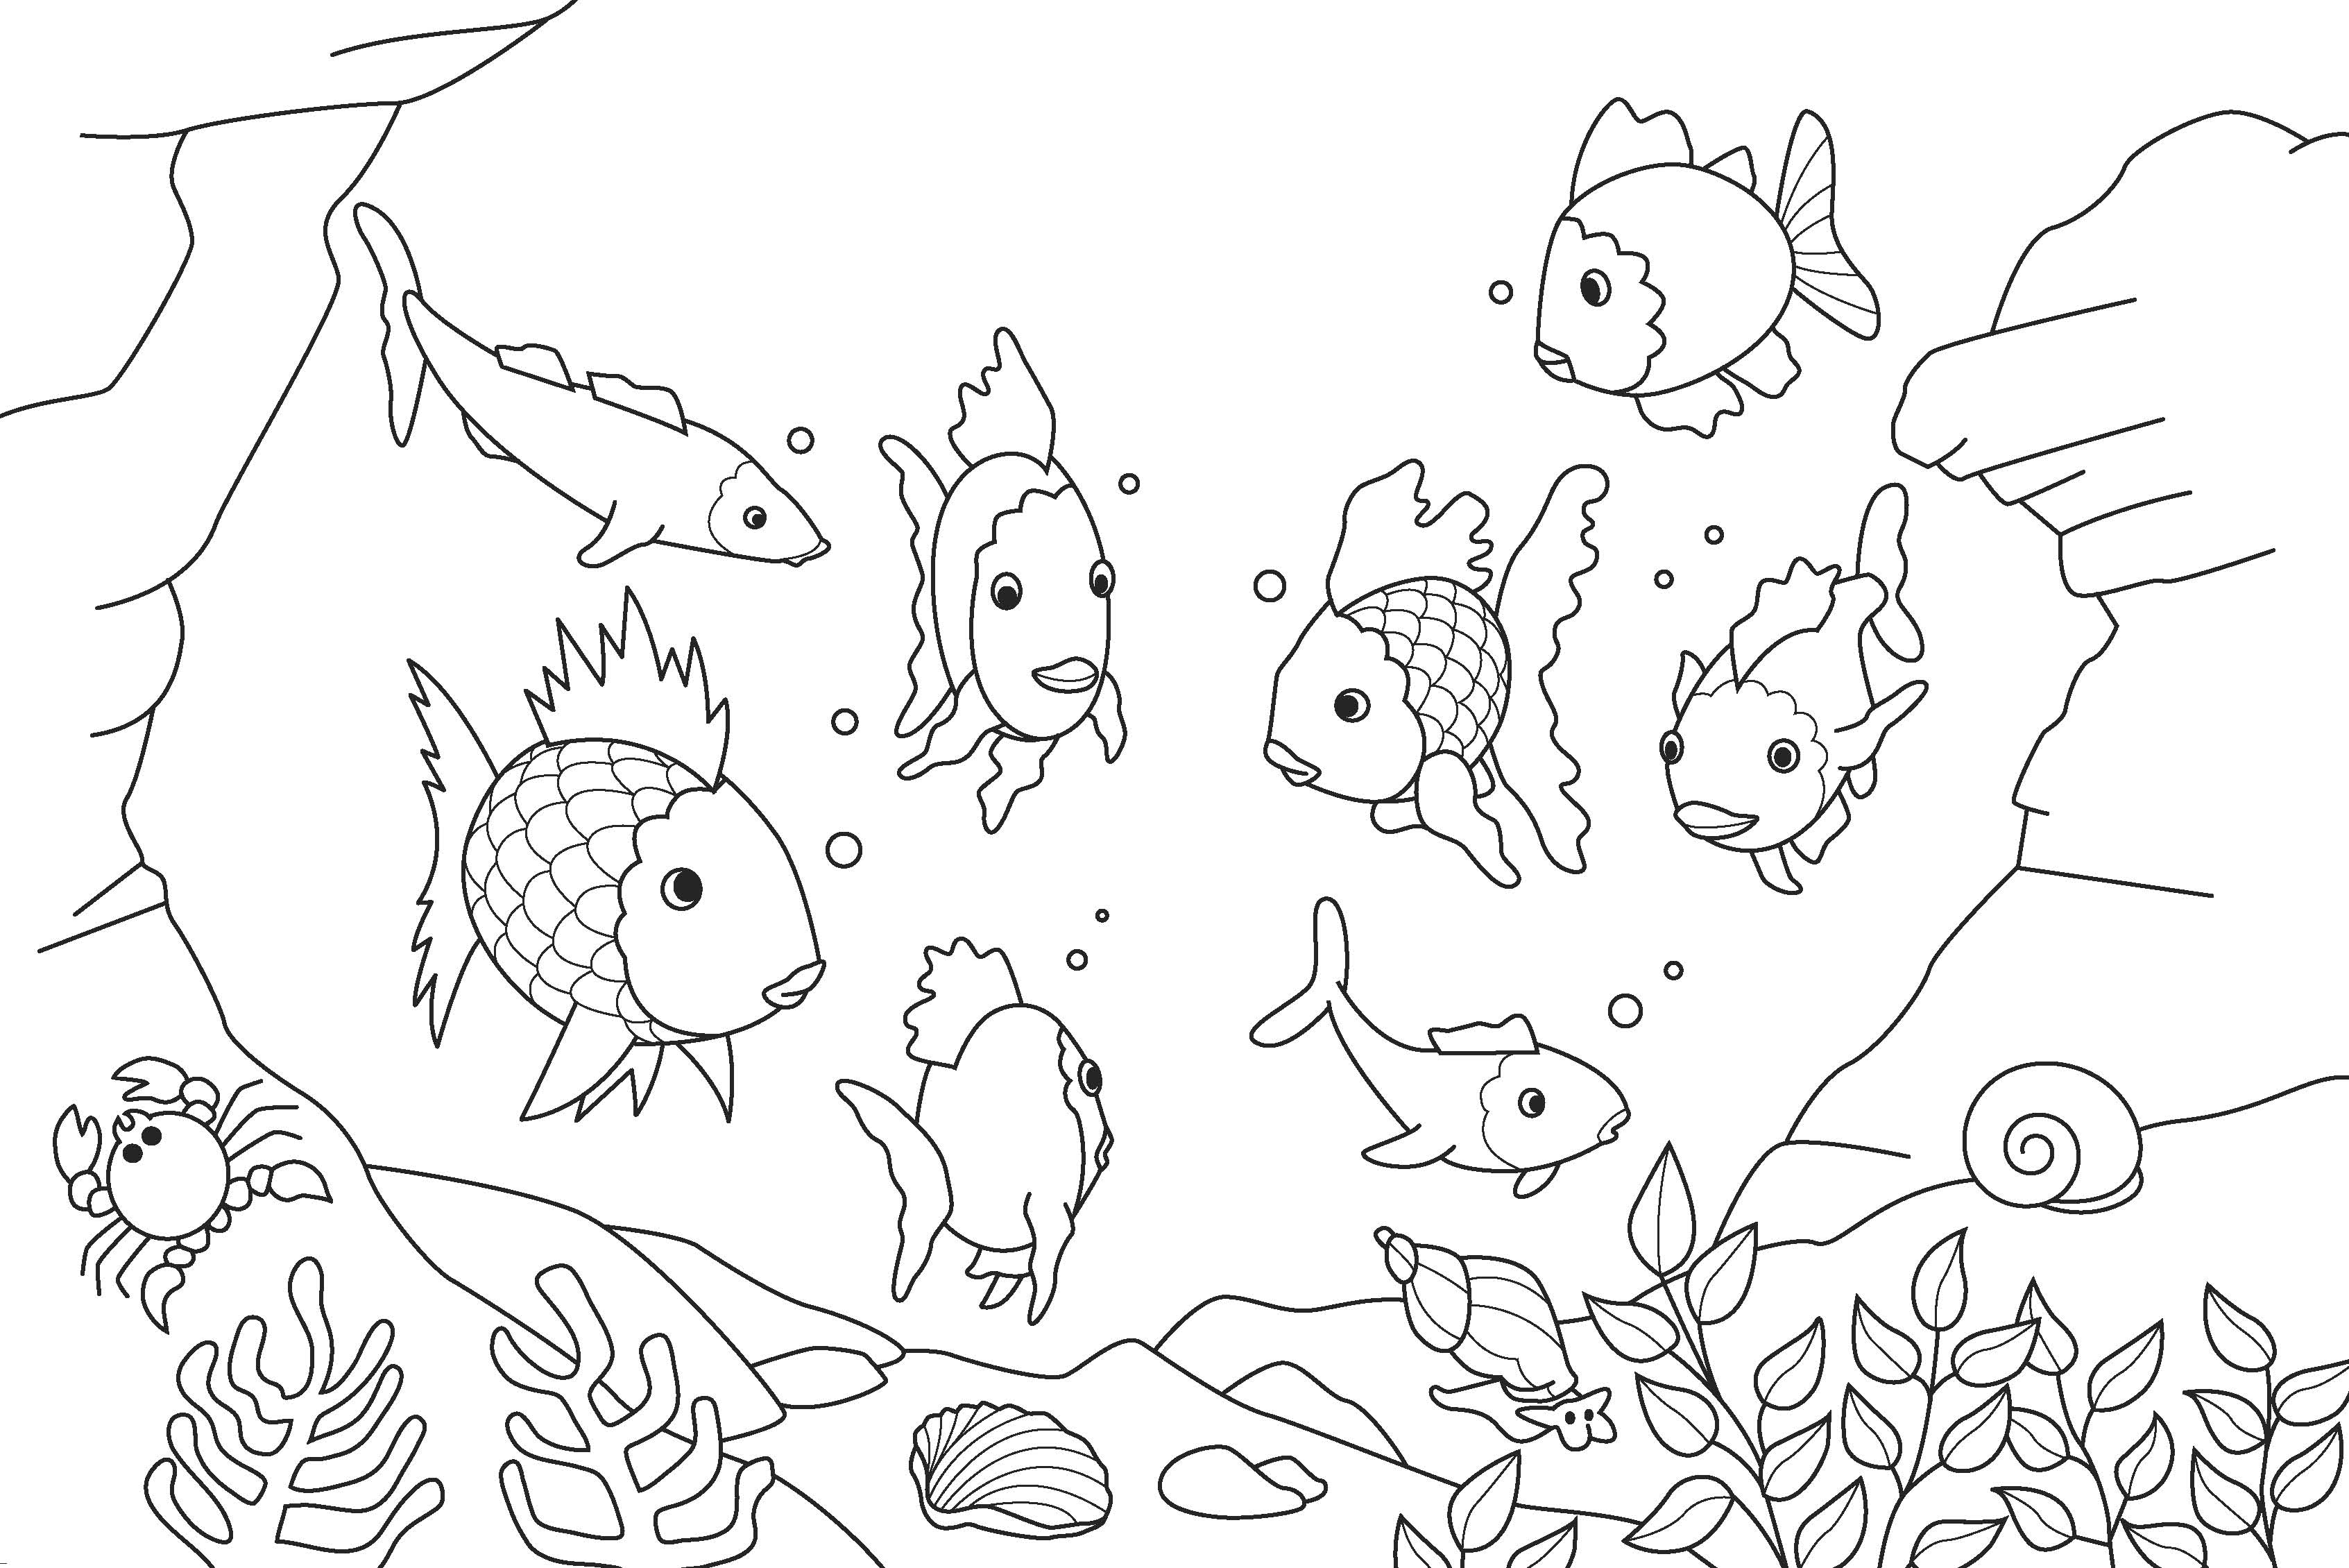 Rainbow Fish Coloring Page - Coloring Pages for Kids and for Adults